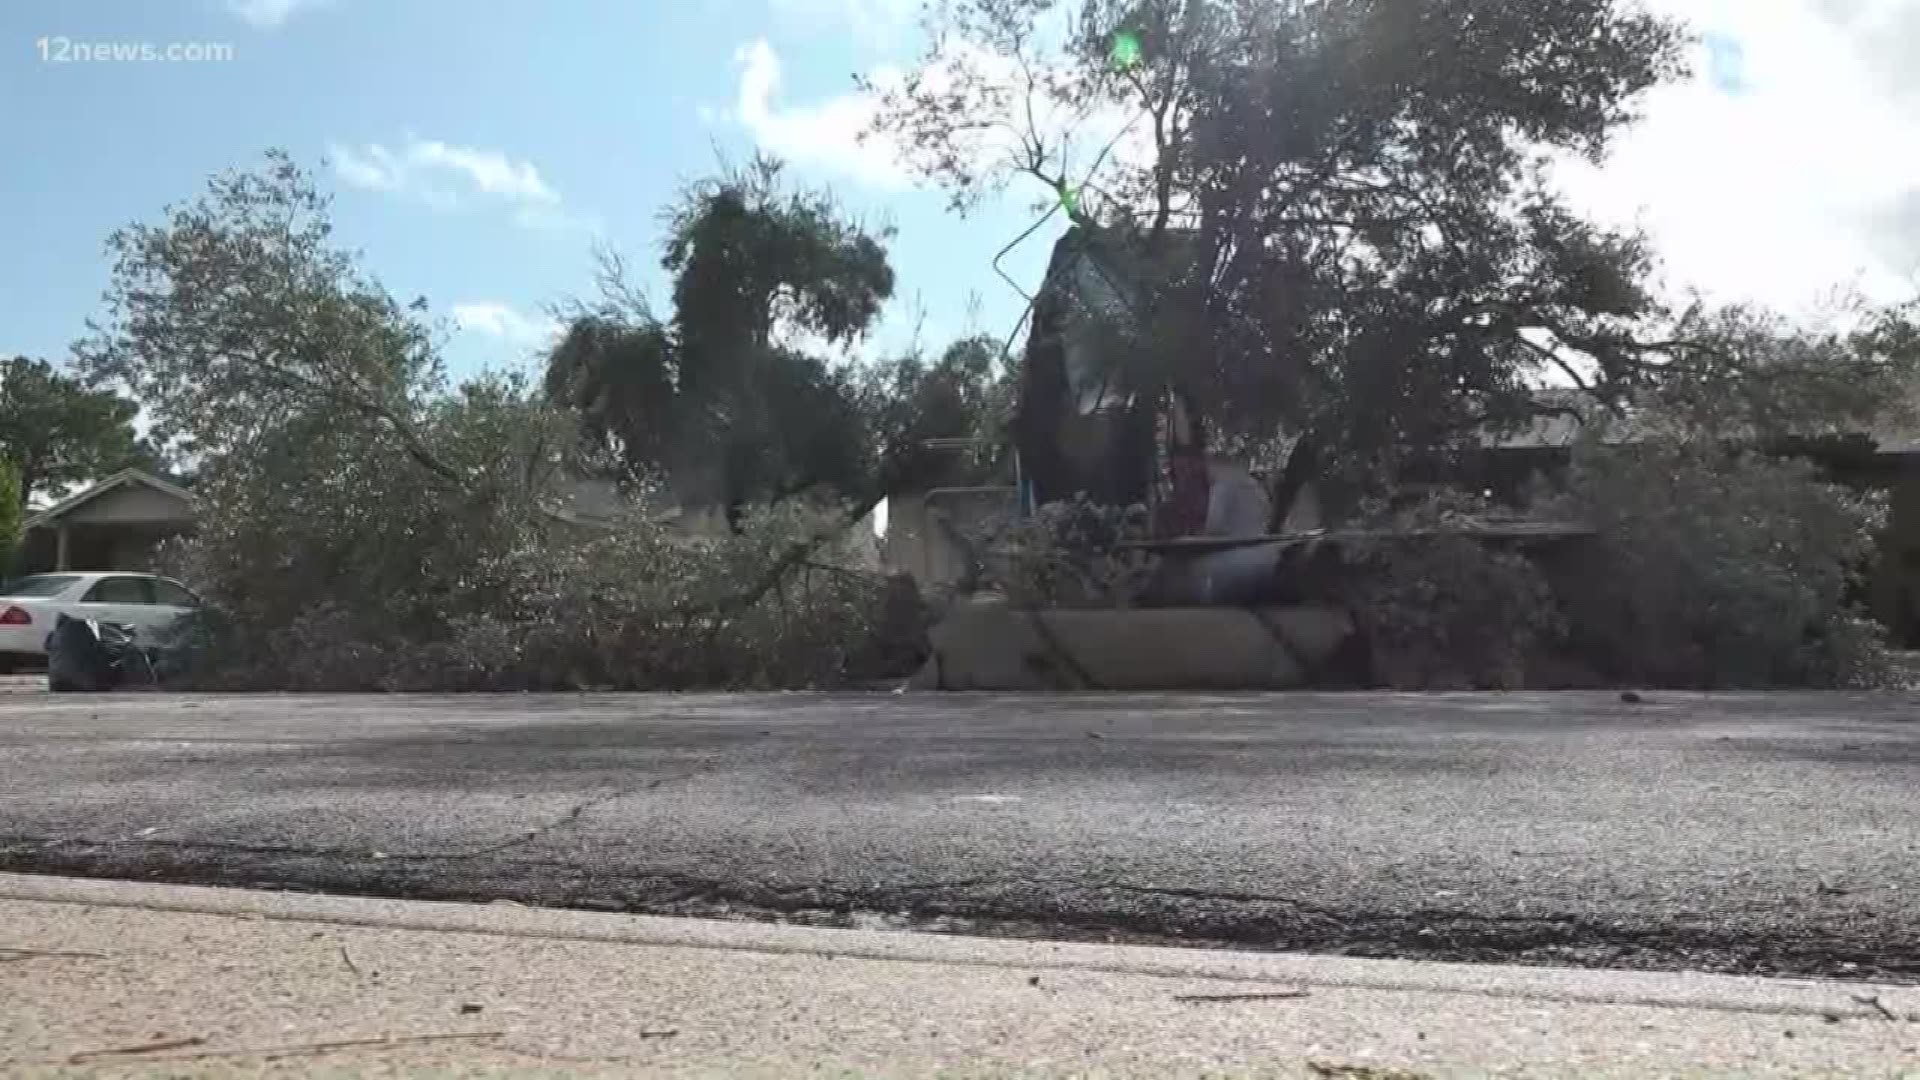 People were busy cleaning up downed trees and fixing their roofs after a strong storm moved through early Friday morning.